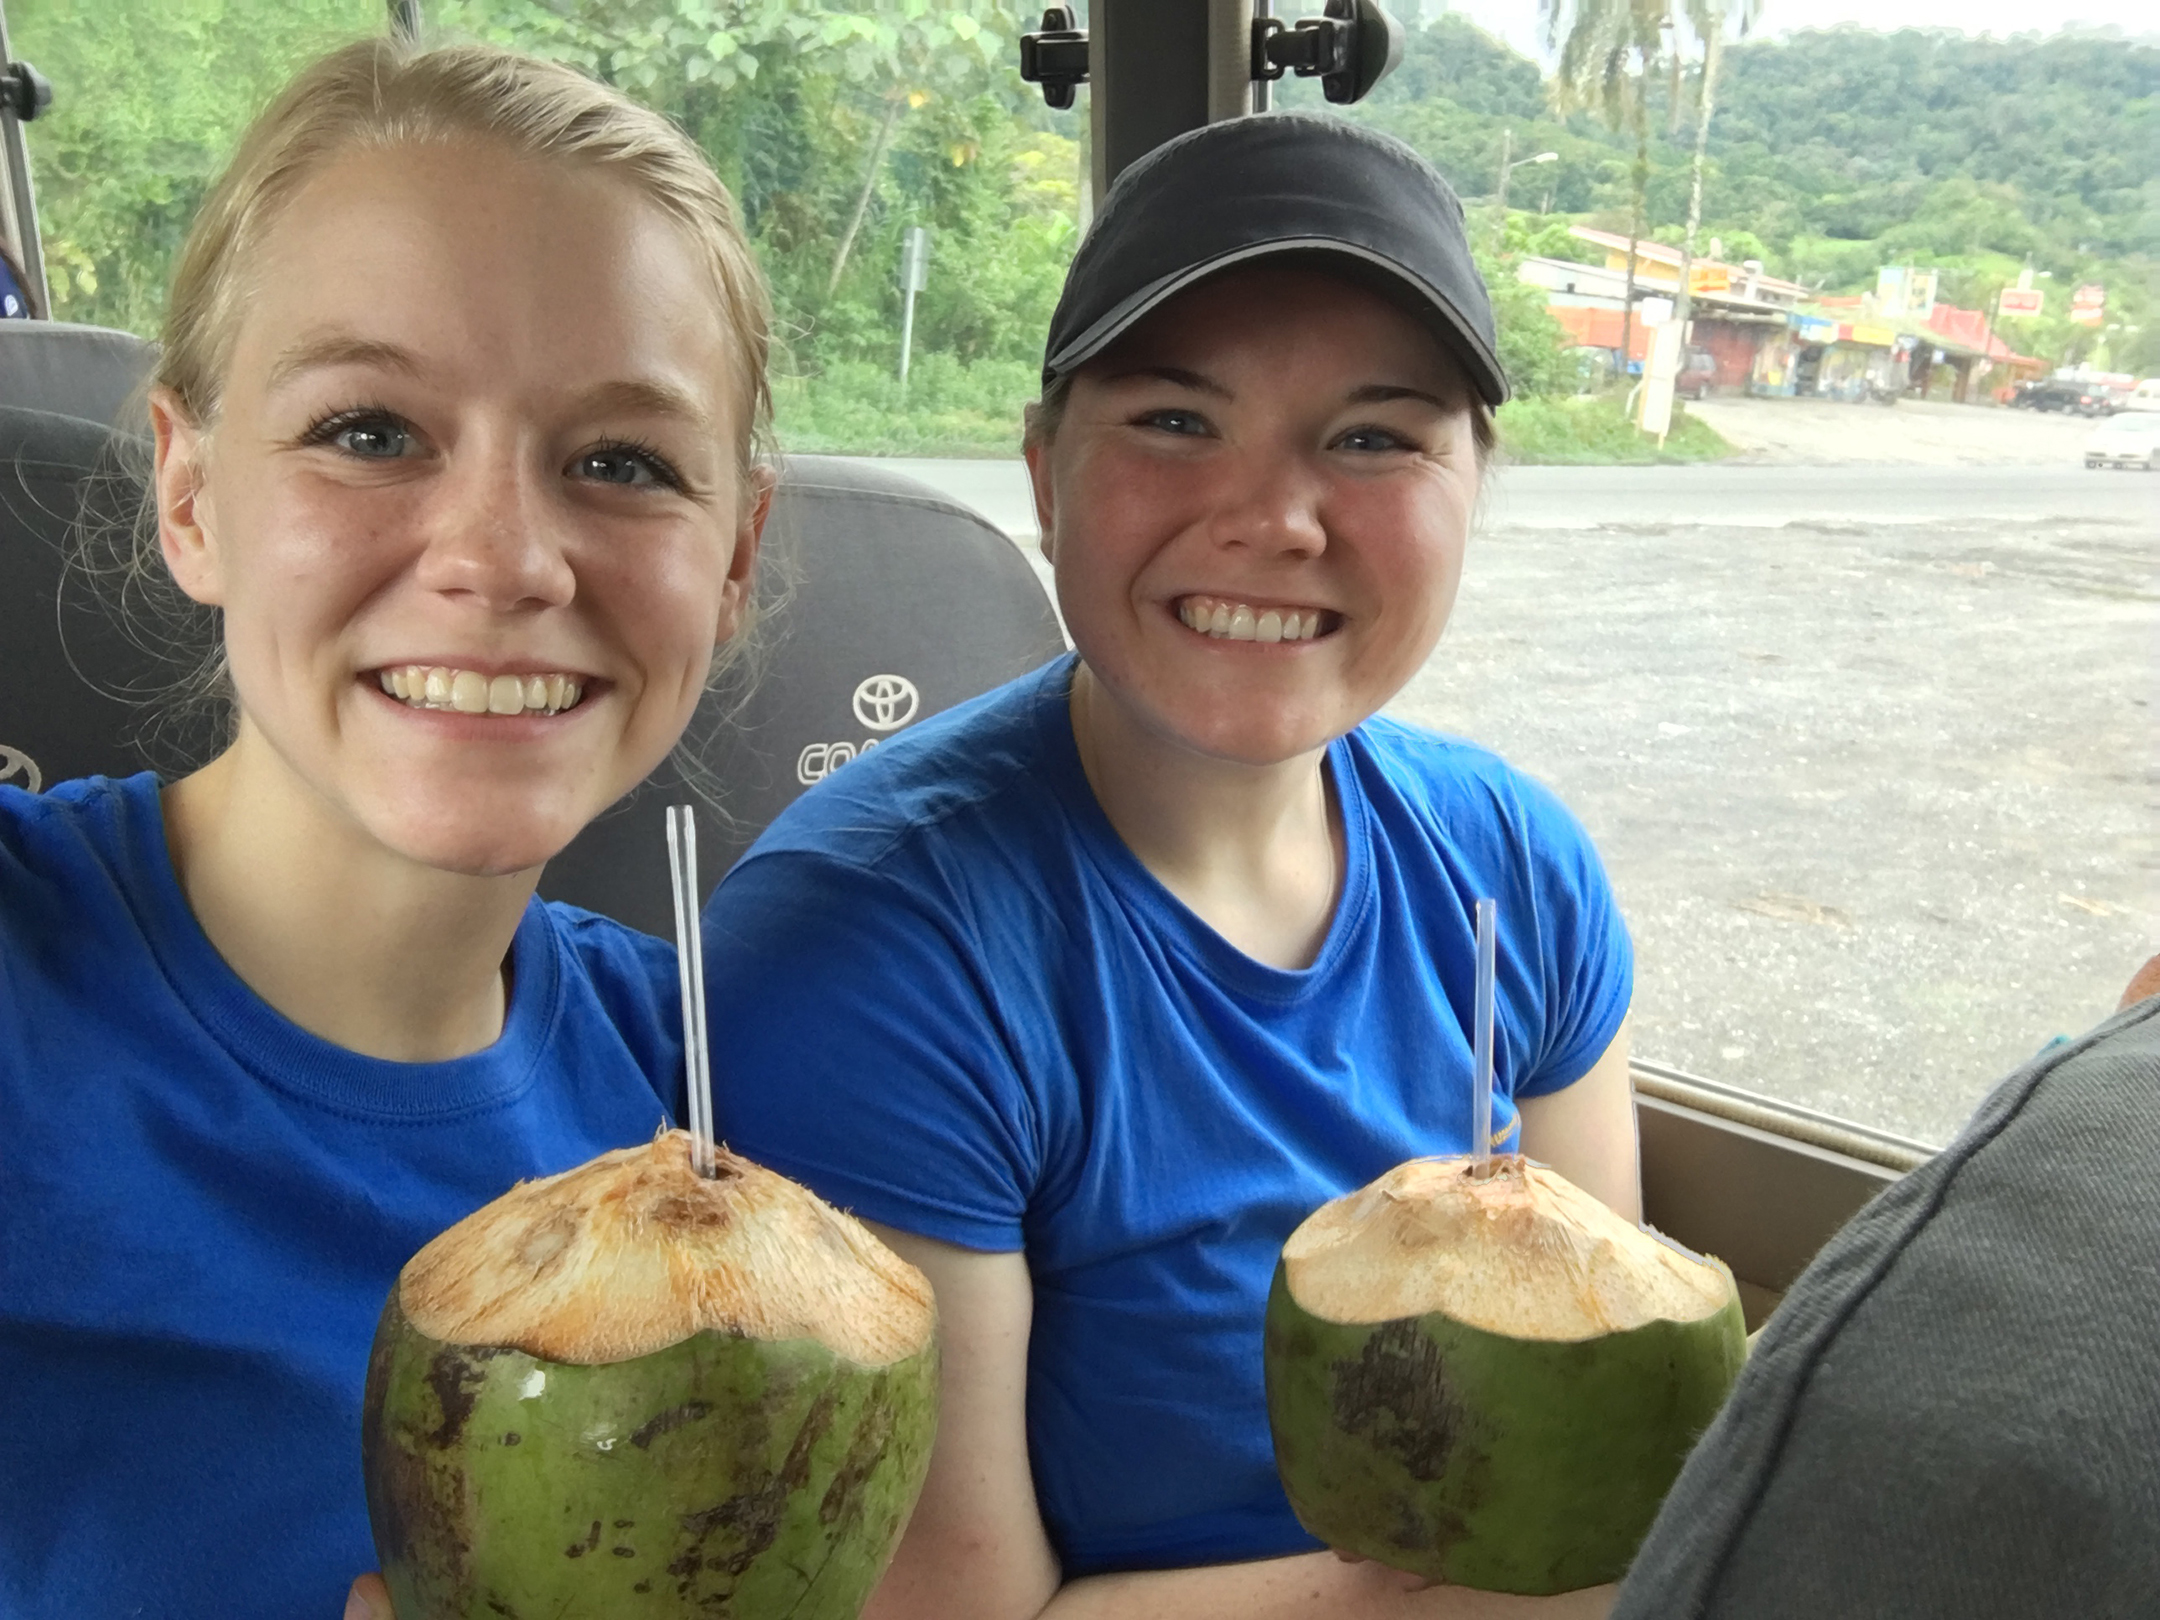 Two students sit in a chartered bus drinking from coconuts with straws coming out of the top